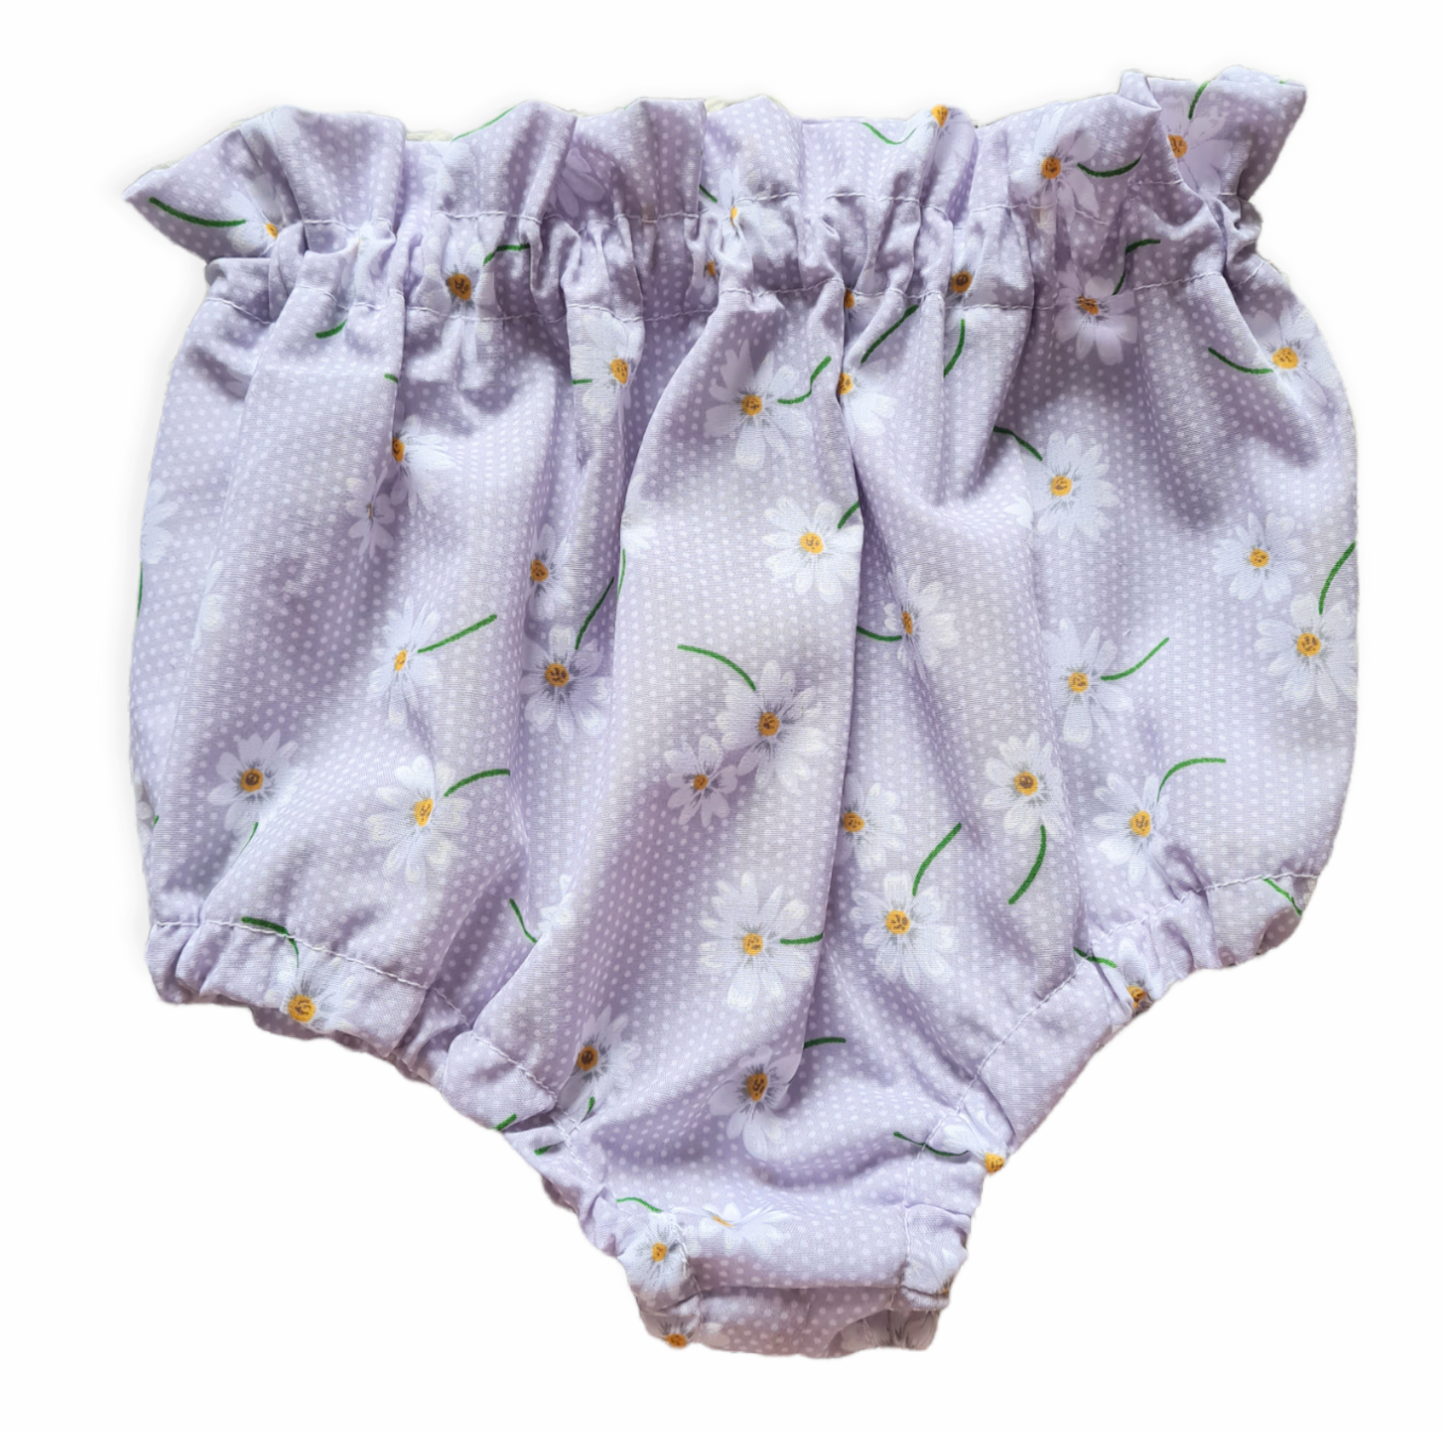 Lilac daisy bloomers 3-6 months